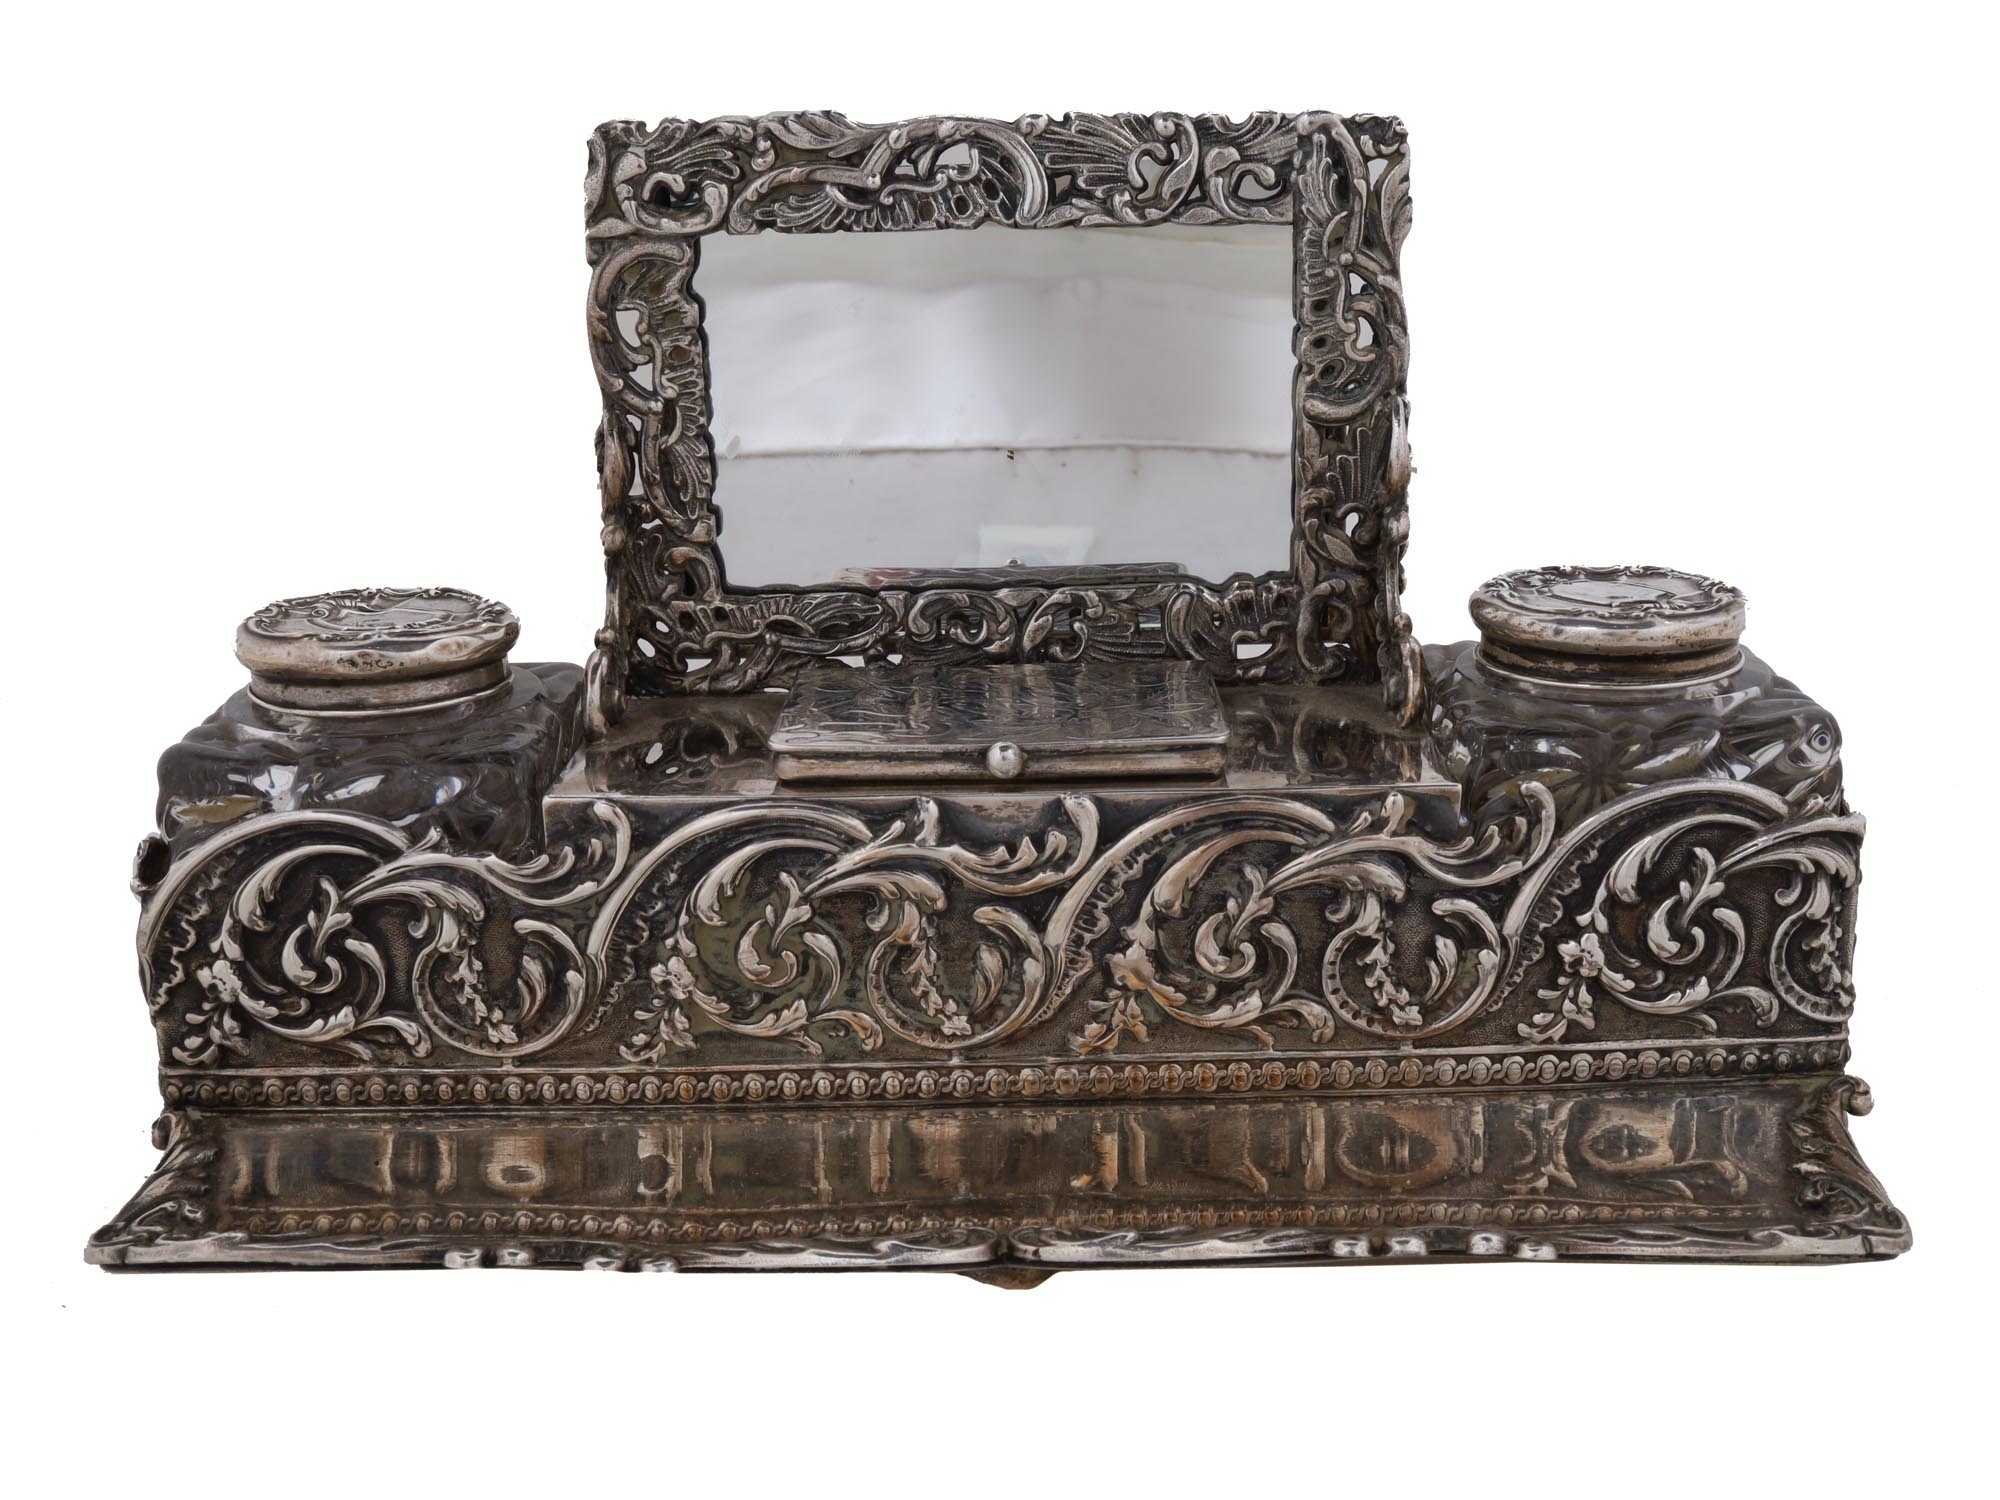 ANTIQUE SILVER AND GLASS INKWELL SET WITH MIRROR PIC-1